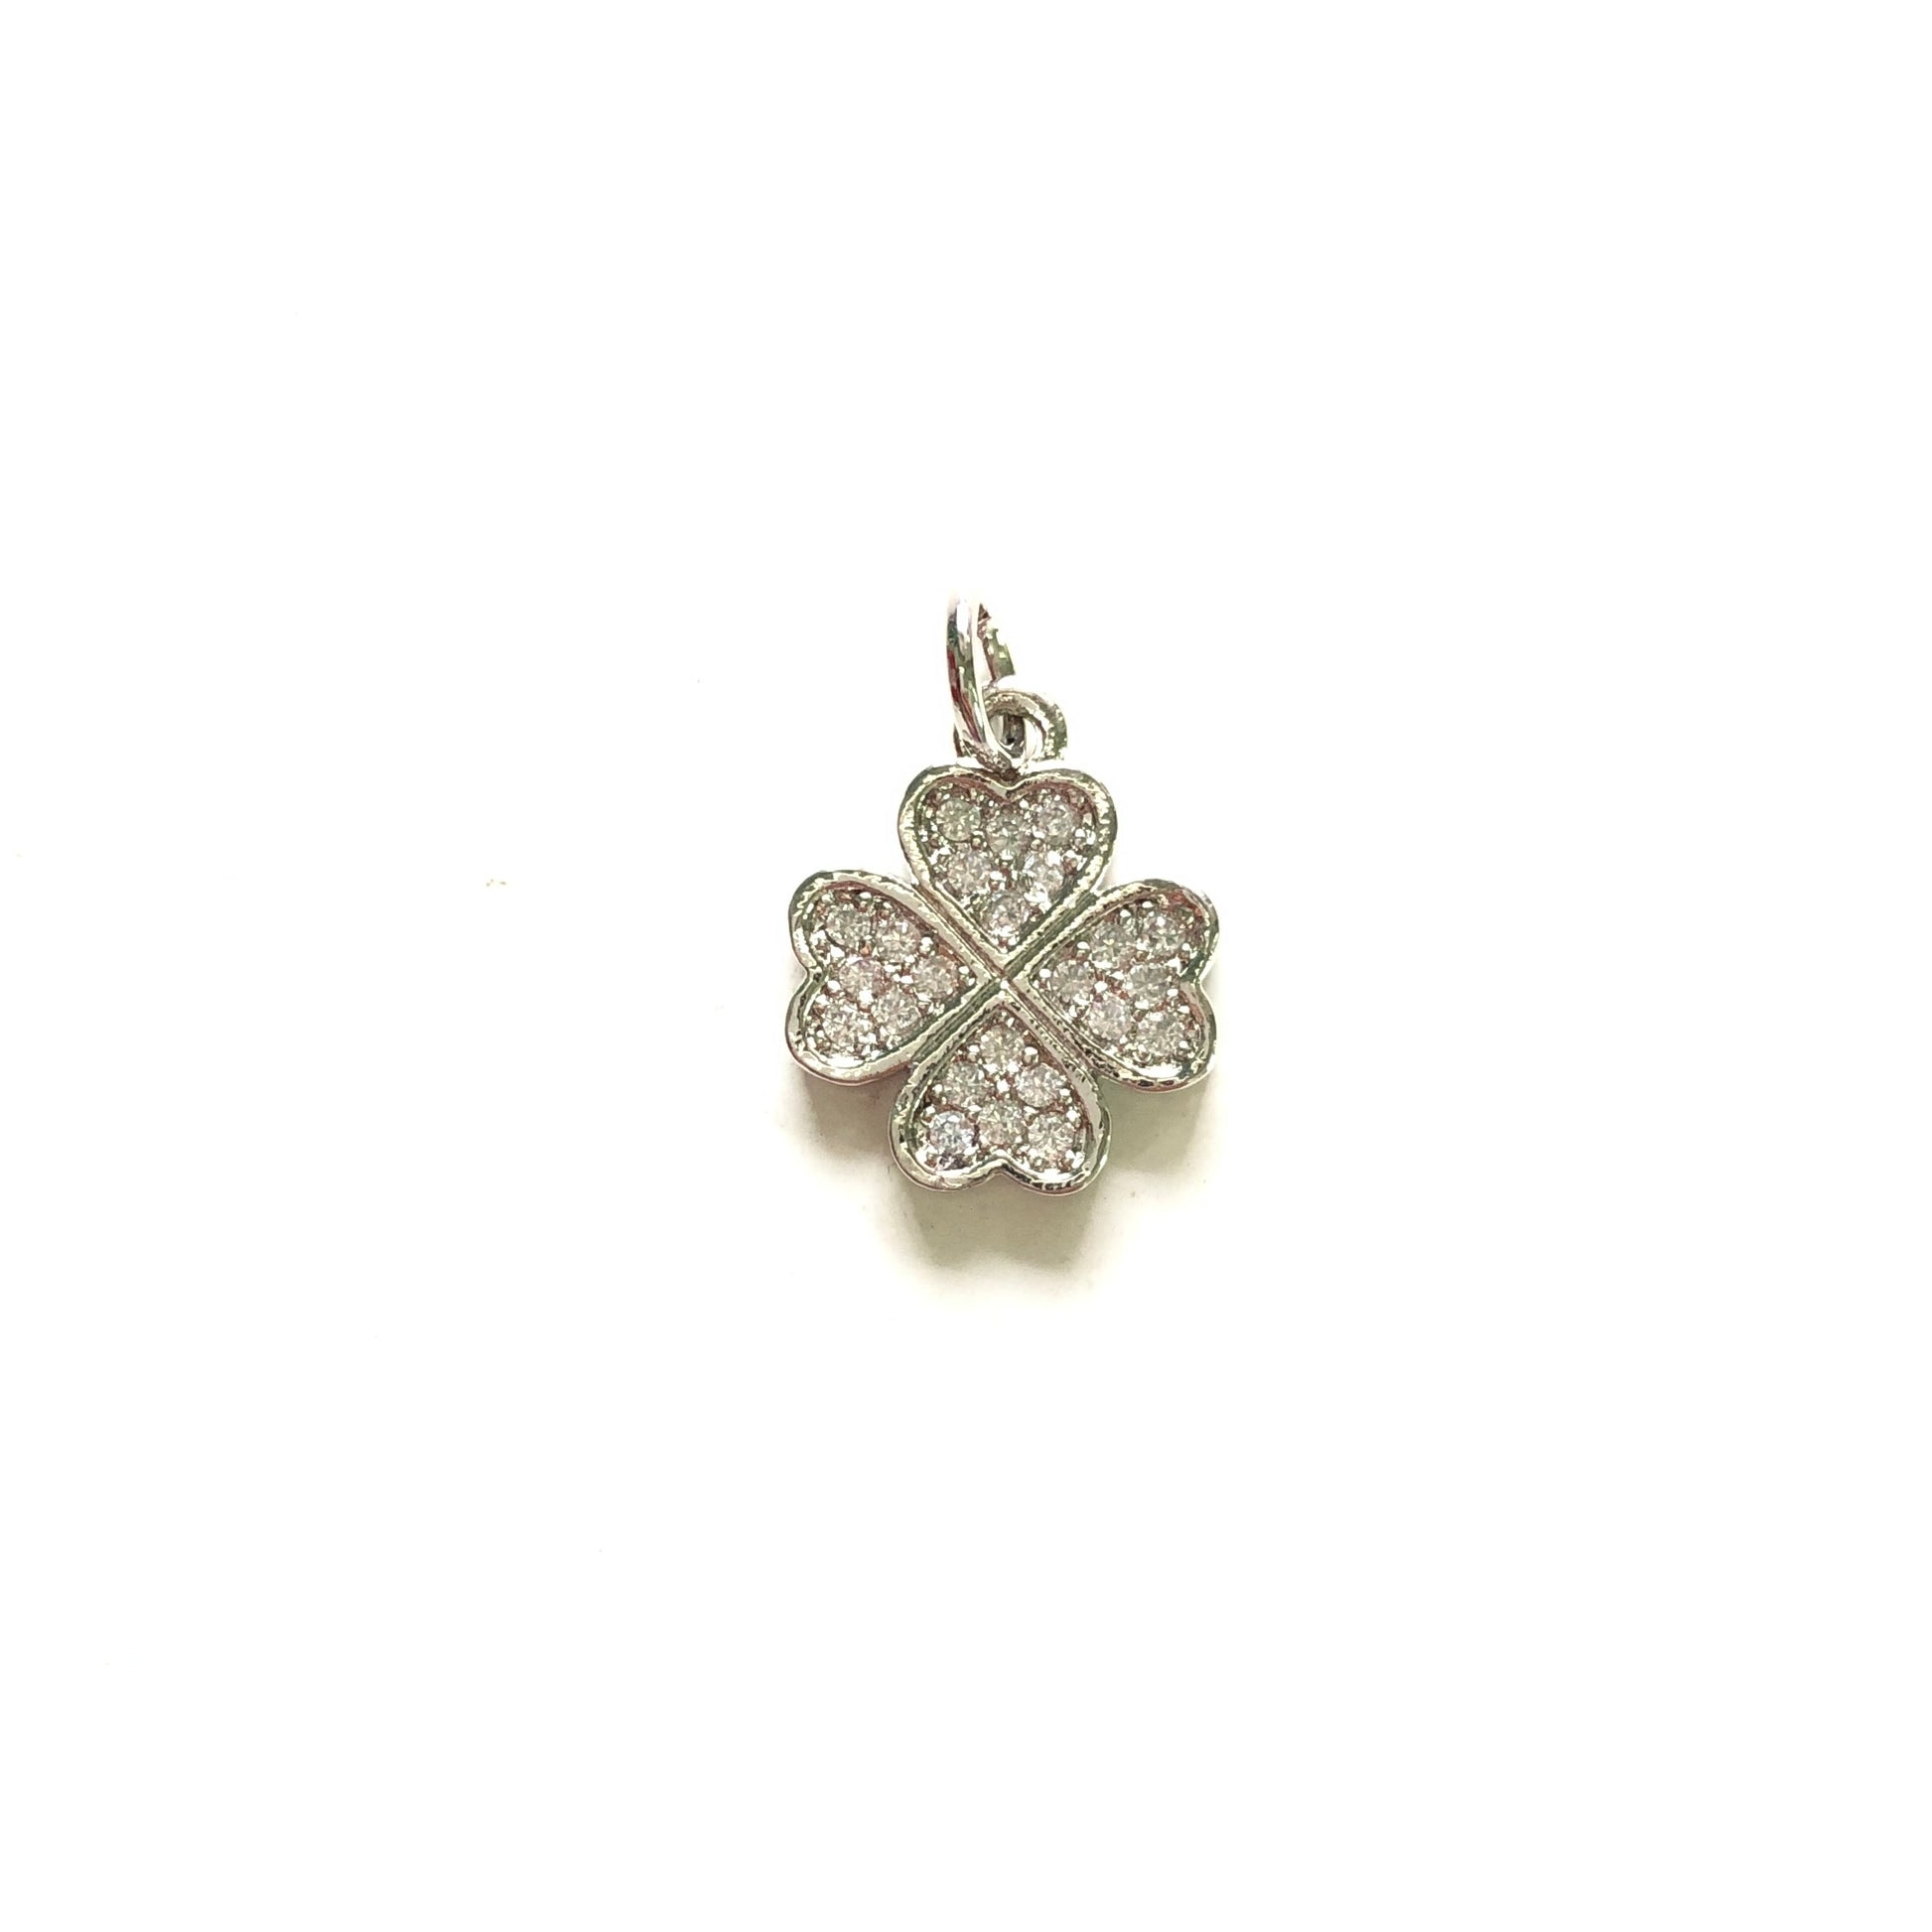 10pcs/lot 14*12mm Small Size CZ Pave Four Leaf Clover Charms Silver CZ Paved Charms Flowers Small Sizes Charms Beads Beyond